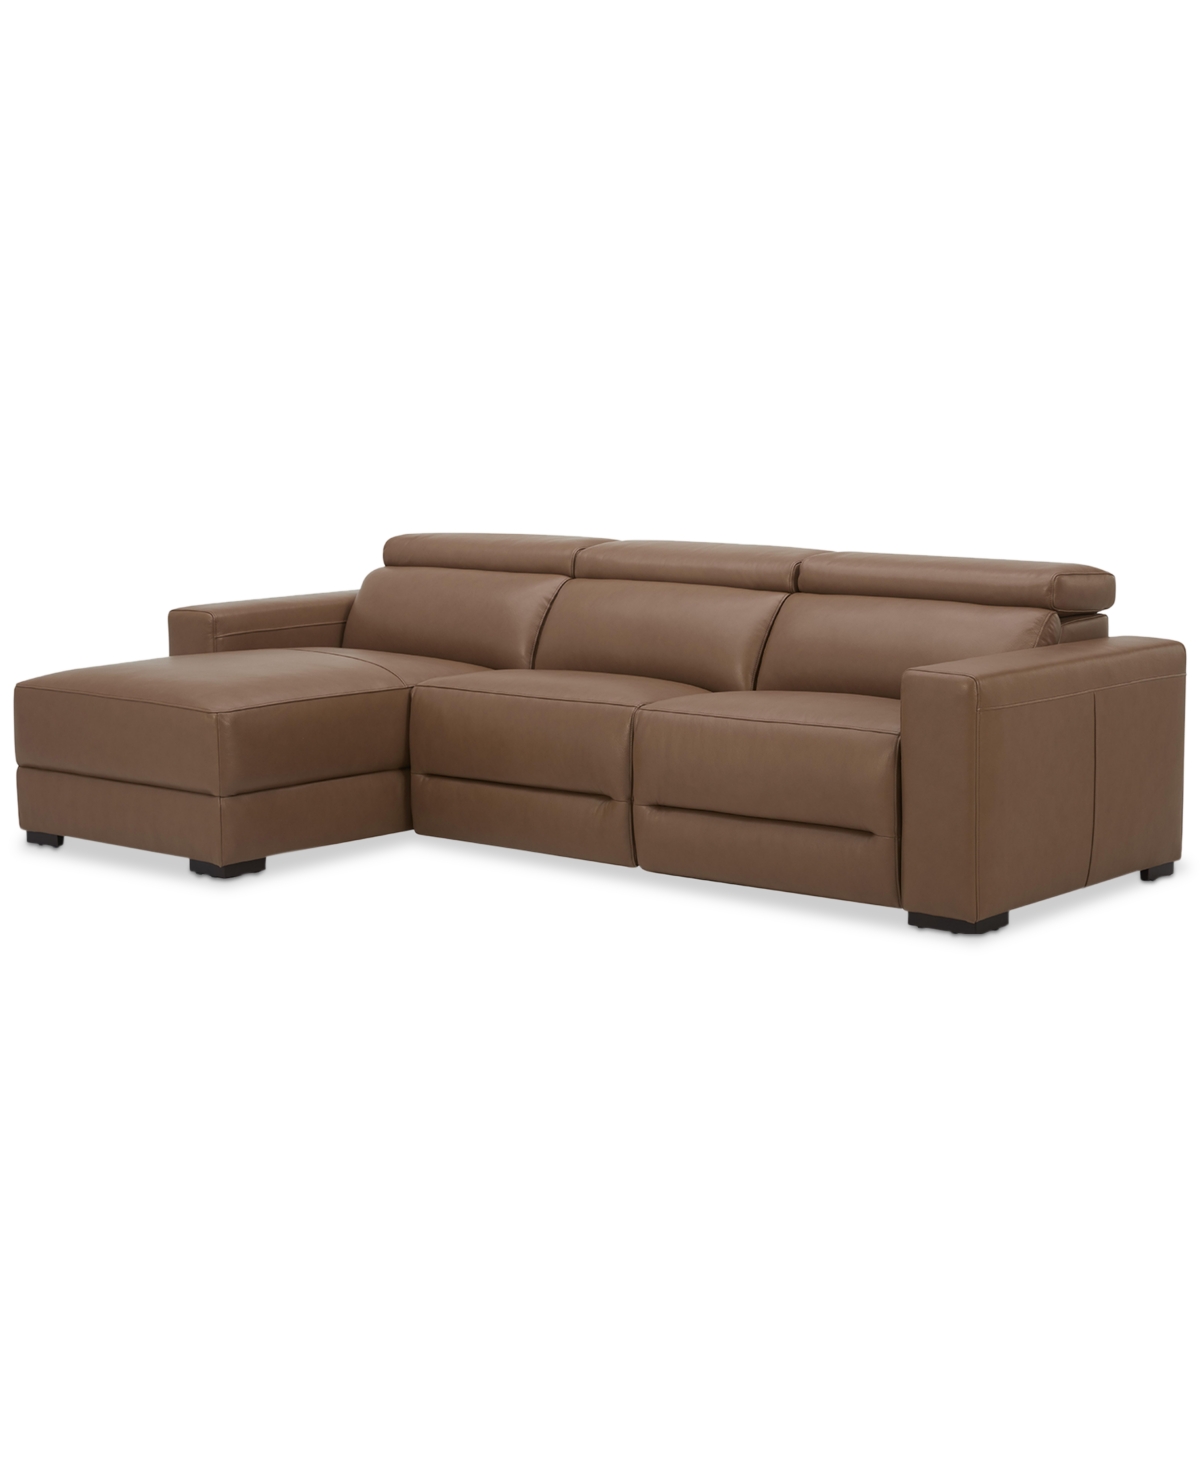 Macy's Nevio 115" 3-pc. Leather Sectional With 2 Power Recliners, Headrests And Chaise, Created For  In Butternut